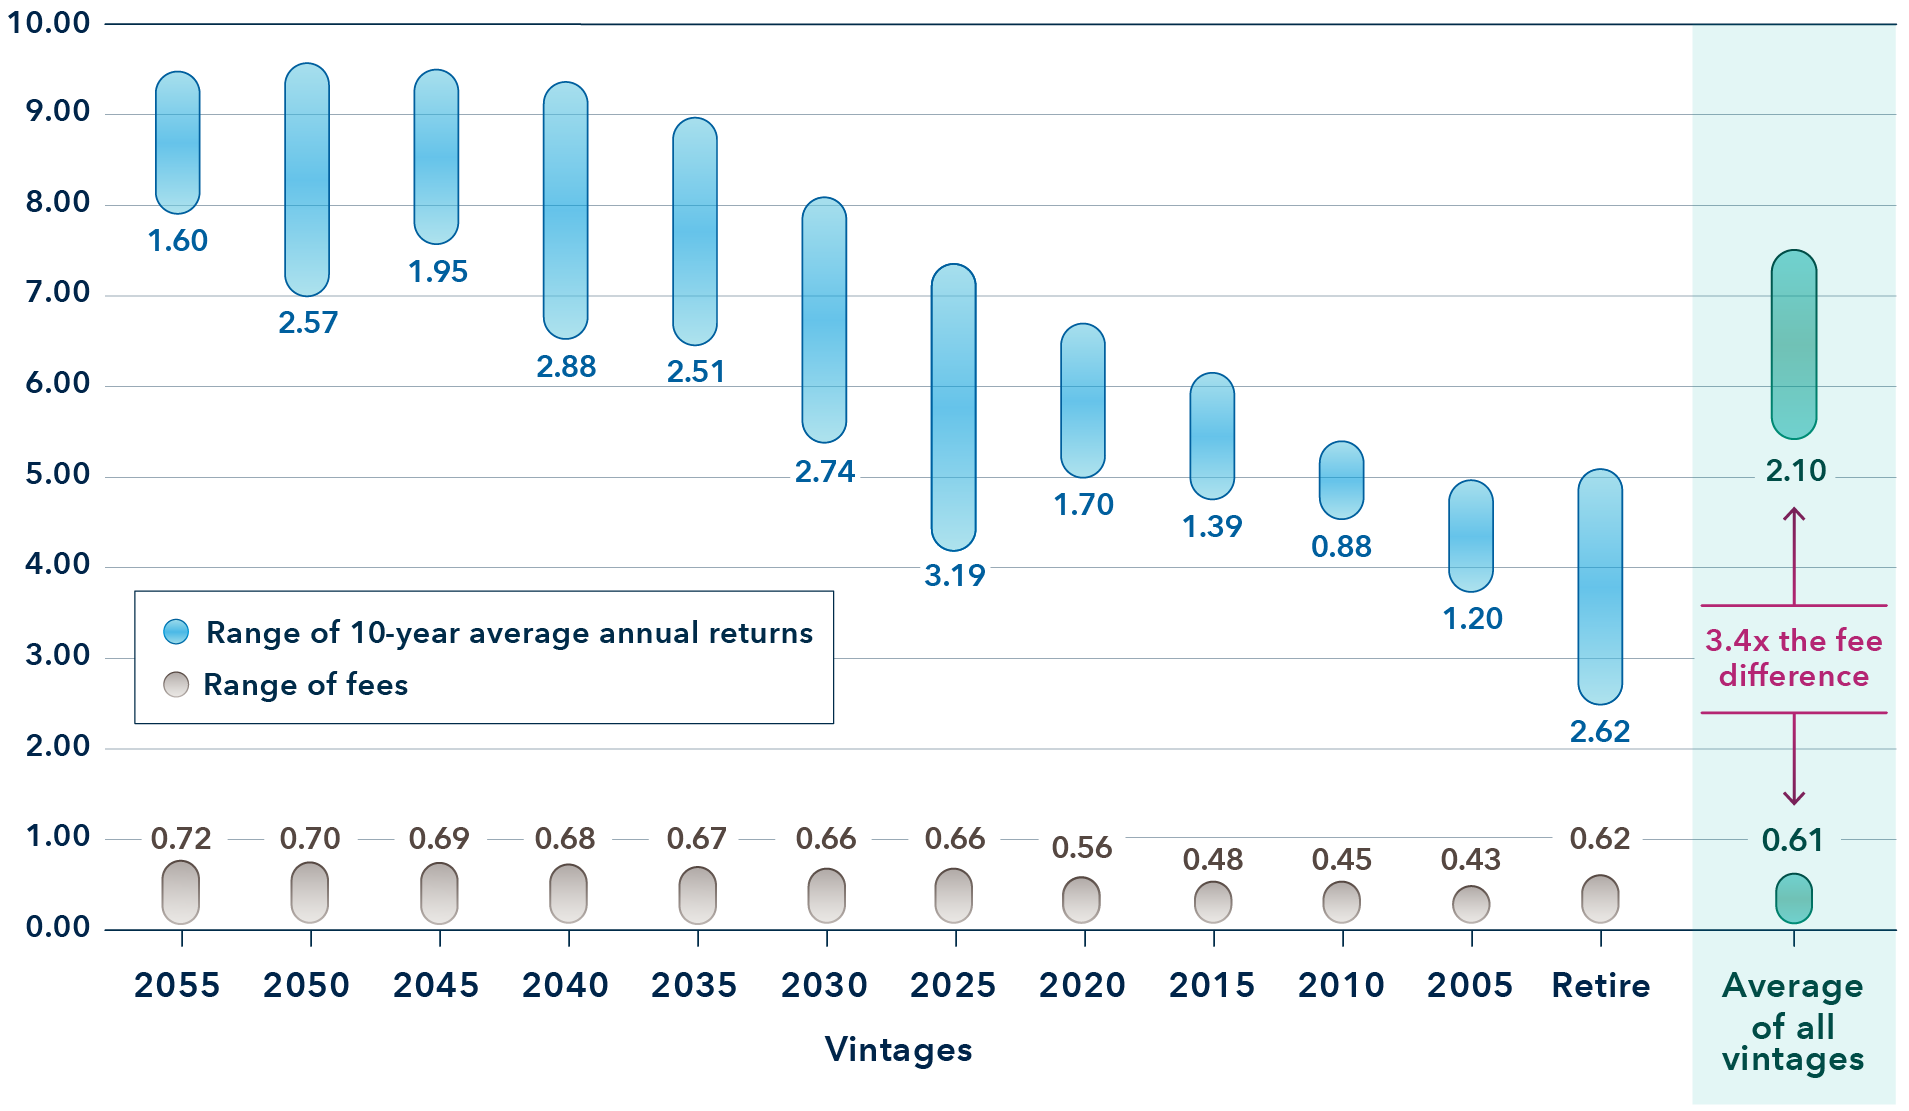 This chart compares the range of 10-year average annual returns (represented by oval blue bars) with the range of fees (represented by oval gray bars) for 12 target date vintages. It also provides the average for each range (represented by oval green bars). The 2055 vintage has a 10-year average annual return range of 1.60% (minimum return: 7.90%; maximum return: 9.50%) and a fee range of 0.72% (minimum fee: 0.06%; maximum fee 0.78%). The 2050 vintage has a 10-year average annual return range of 2.57% (minimum return: 6.98%; maximum return: 9.55%) and a fee range of 0.70% (minimum fee: 0.06%; maximum fee 0.76%). The 2045 vintage has a 10-year average annual return range of 1.95% (minimum return: 7.57%; maximum return: 9.52%) and a fee range of 0.69% (minimum fee: 0.06%; maximum fee 0.75%). The 2040 vintage has a 10-year average annual return range of 2.88% (minimum return: 6.51%; maximum return: 9.39%) and a fee range of 0.68% (minimum fee: 0.06%; maximum fee 0.74%). The 2035 vintage has a 10-year average annual return range of 2.51% (minimum return: 6.46%; maximum return: 8.97%) and a fee range of 0.67% (minimum fee: 0.06%; maximum fee 0.73%). The 2030 vintage has a 10-year average annual return range of 2.74% (minimum return: 5.36%; maximum return: 8.1%) and a fee range of 0.66% (minimum fee: 0.06%; maximum fee 0.72%). The 2025 vintage has a 10-year average annual return range of 3.19% (minimum return: 4.18%; maximum return: 7.37%) and a fee range of 0.66% (minimum fee: 0.06%; maximum fee 0.72%). The 2020 vintage has a 10-year average annual return range of 1.7% (minimum return: 5%; maximum return: 6.7%) and a fee range of 0.56% (minimum fee: 0.06%; maximum fee 0.62%). The 2015 vintage has a 10-year average annual return range of 1.39% (minimum return: 4.64%; maximum return: 6.03%) and a fee range of 0.48% (minimum fee: 0.06%; maximum fee 0.54%). The 2010 vintage has a 10-year average annual return range of 0.88% (minimum return: 4.53%; maximum return: 5.41%) and a fee range of 0.45% (minimum fee: 0.06%; maximum fee 0.51%). The 2005 vintage has a 10-year average annual return range of 1.20% (minimum return: 3.75%; maximum return: 4.95%) and a fee range of 0.43% (minimum fee: 0.06%; maximum fee 0.49%). The in-retirement vintage has a 10-year average annual return range of 2.62% (minimum return: 2.48%; maximum return: 5.1%) and a fee range of 0.62% (minimum fee: 0.06%; maximum fee 0.68%). The average vintage has a 10-year average annual return range of 2.10% (minimum return: 5.45%; maximum return: 7.55%) and a fee range of 0.61% (minimum fee: 0.06%; maximum fee 0.67%). Callout text with up and down arrows between the average ranges specifies that the average for the 10-year average annual return range is 3.4 times the fee range average.